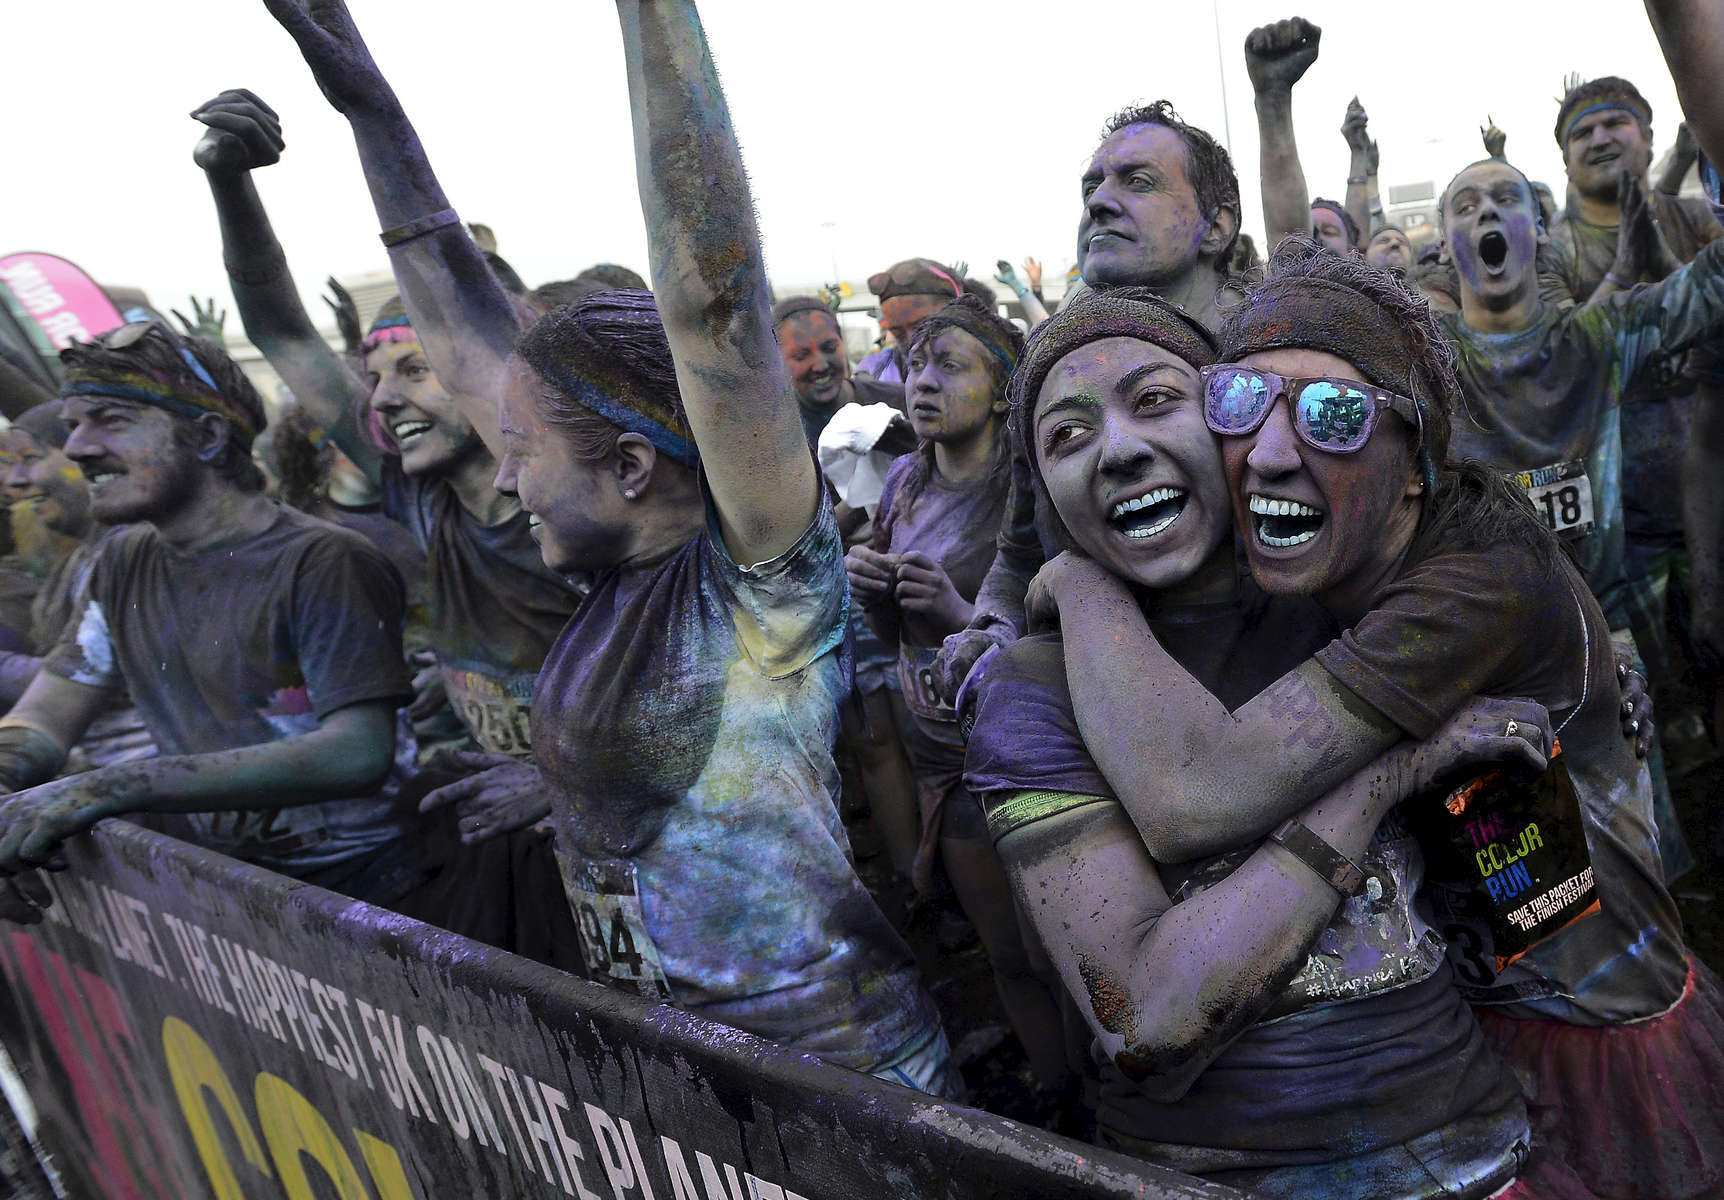 Runners listen to music in the festival areaafter the 5K Color Run in Nashville, Tenn.(Mark Zaleski/ For The Tennessean)